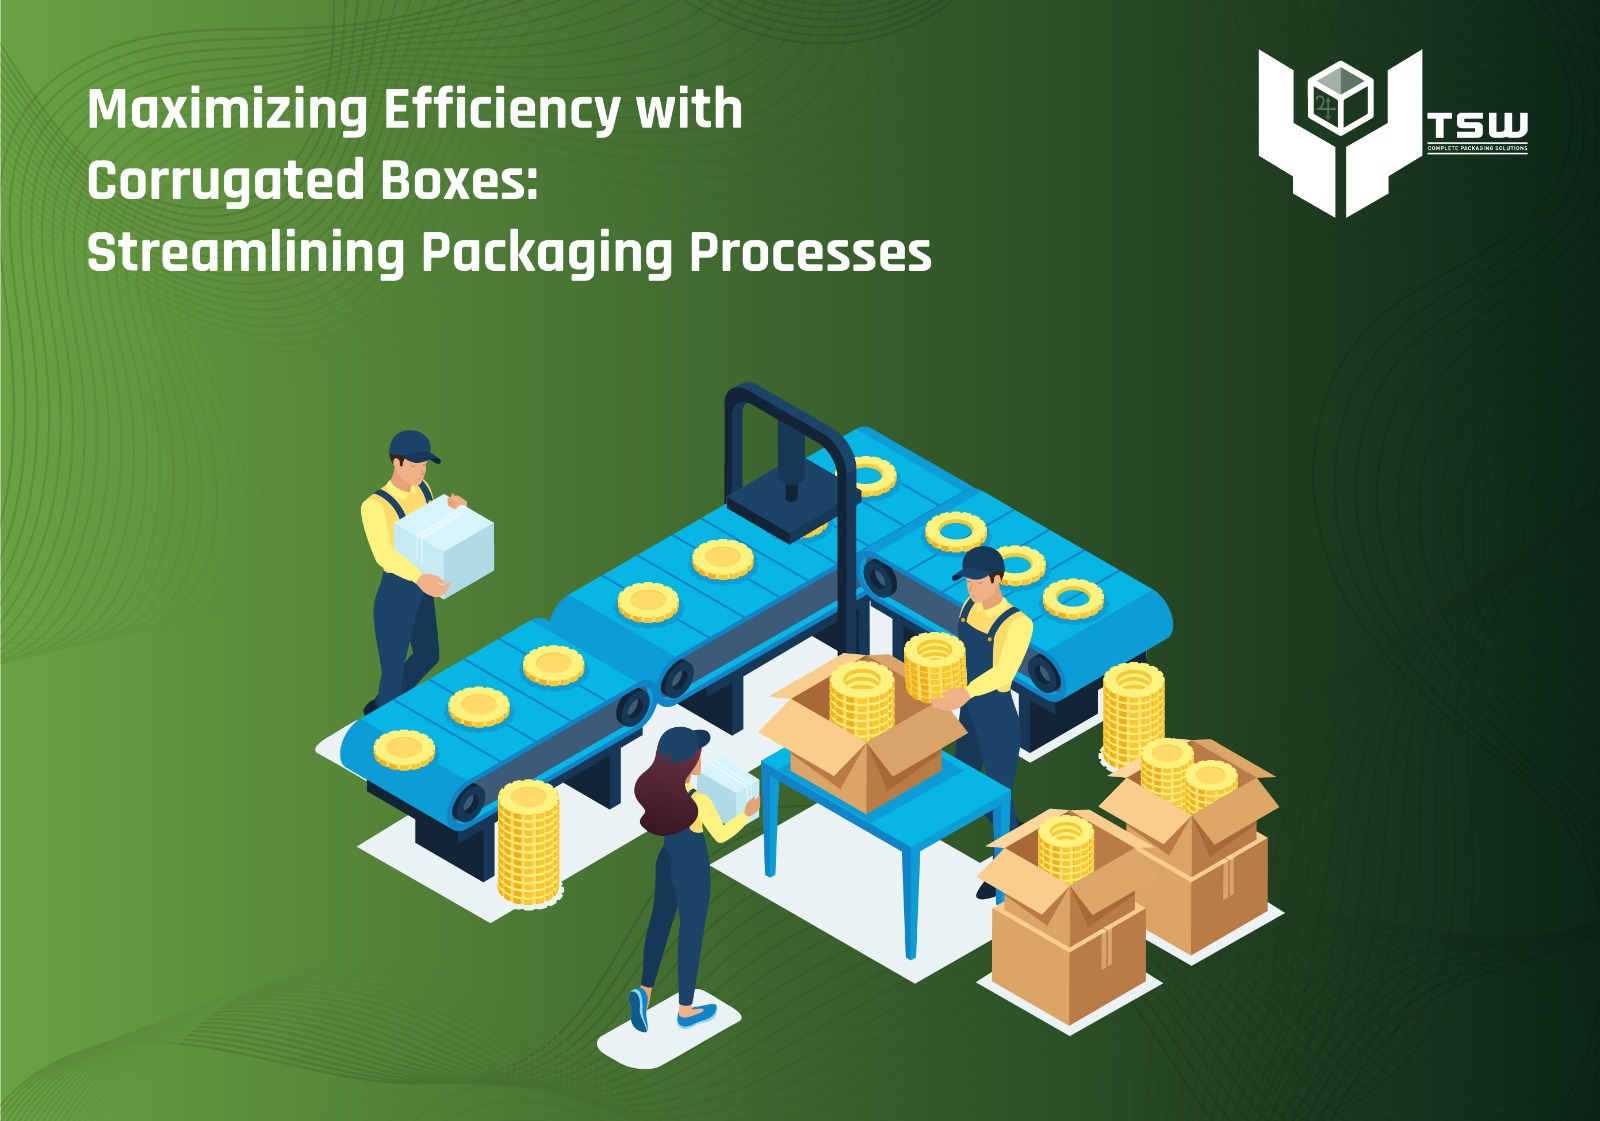 Maximizing Efficiency with Corrugated Boxes: Streamlining Packaging Processes